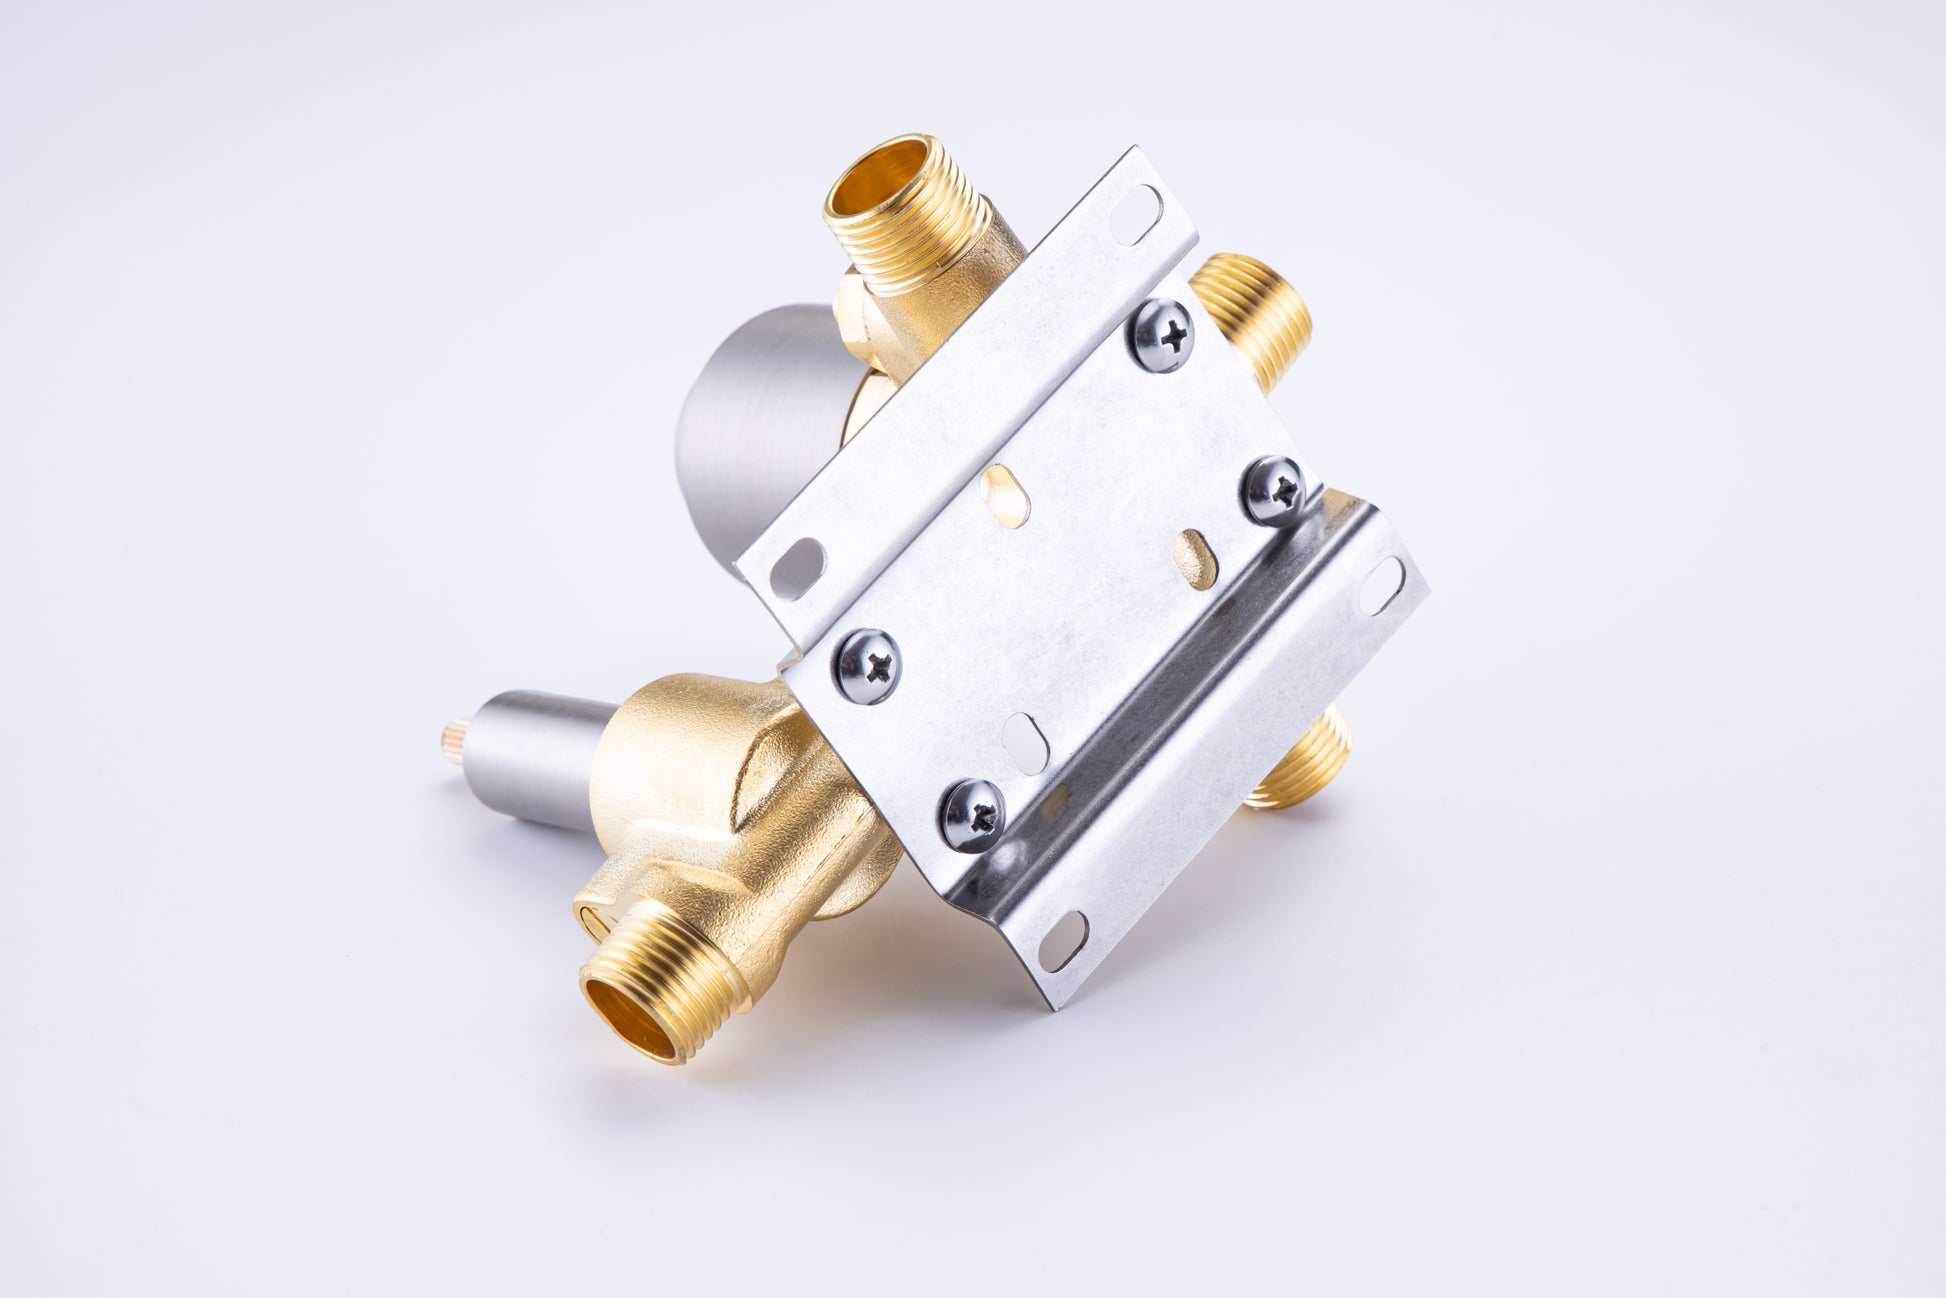 Shower Faucet Set, Wall Mount Round hower System Mixer brushed nickel-brass